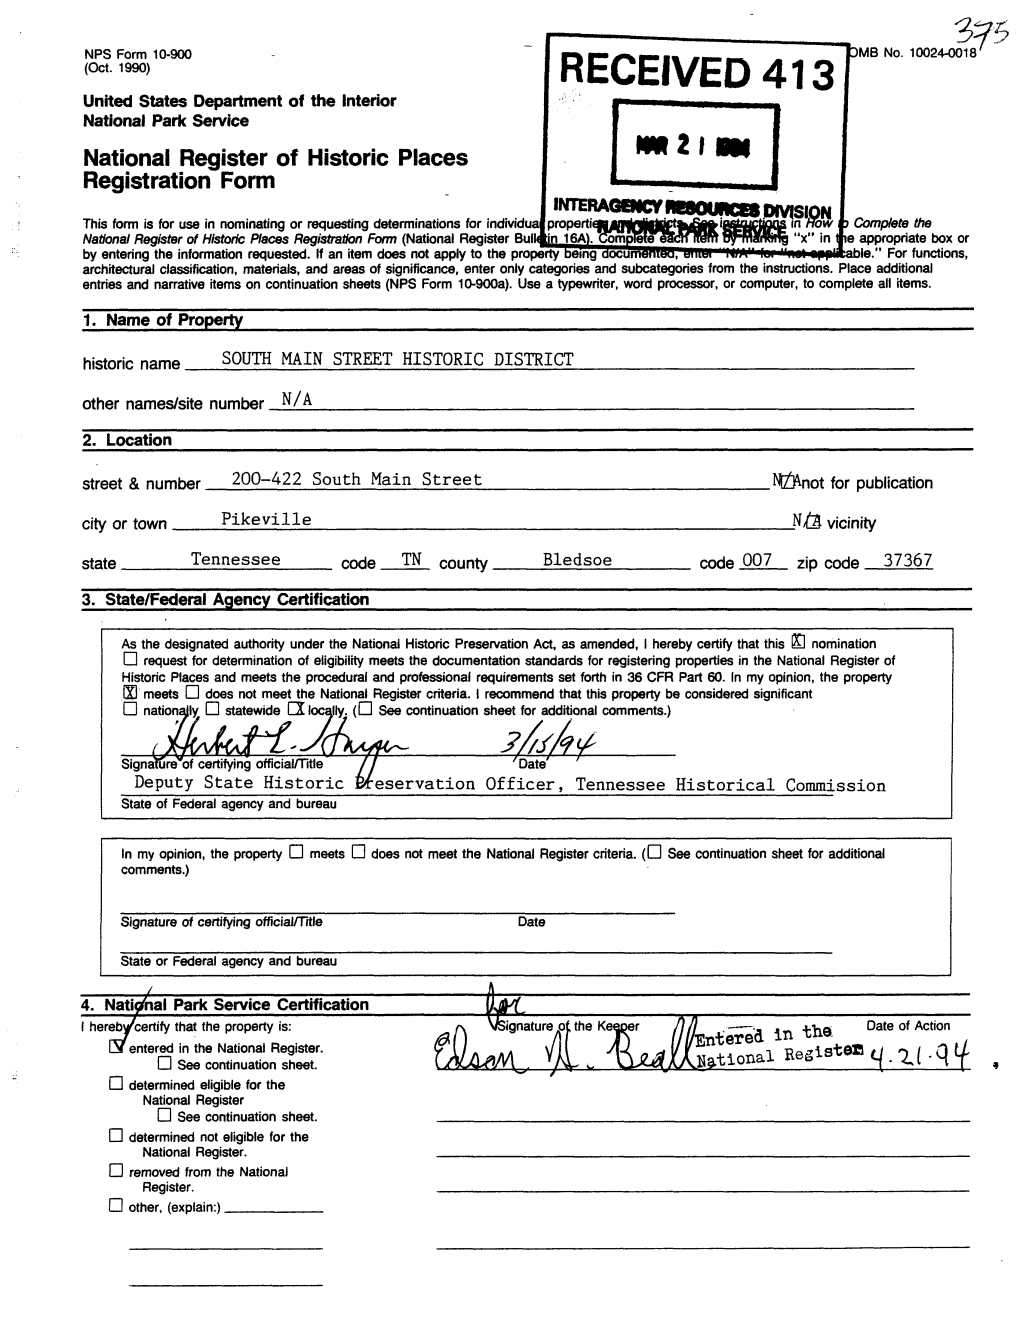 RECEIVED 413 United States Department of the Interior National Park Service National Register of Historic Places Registration Form